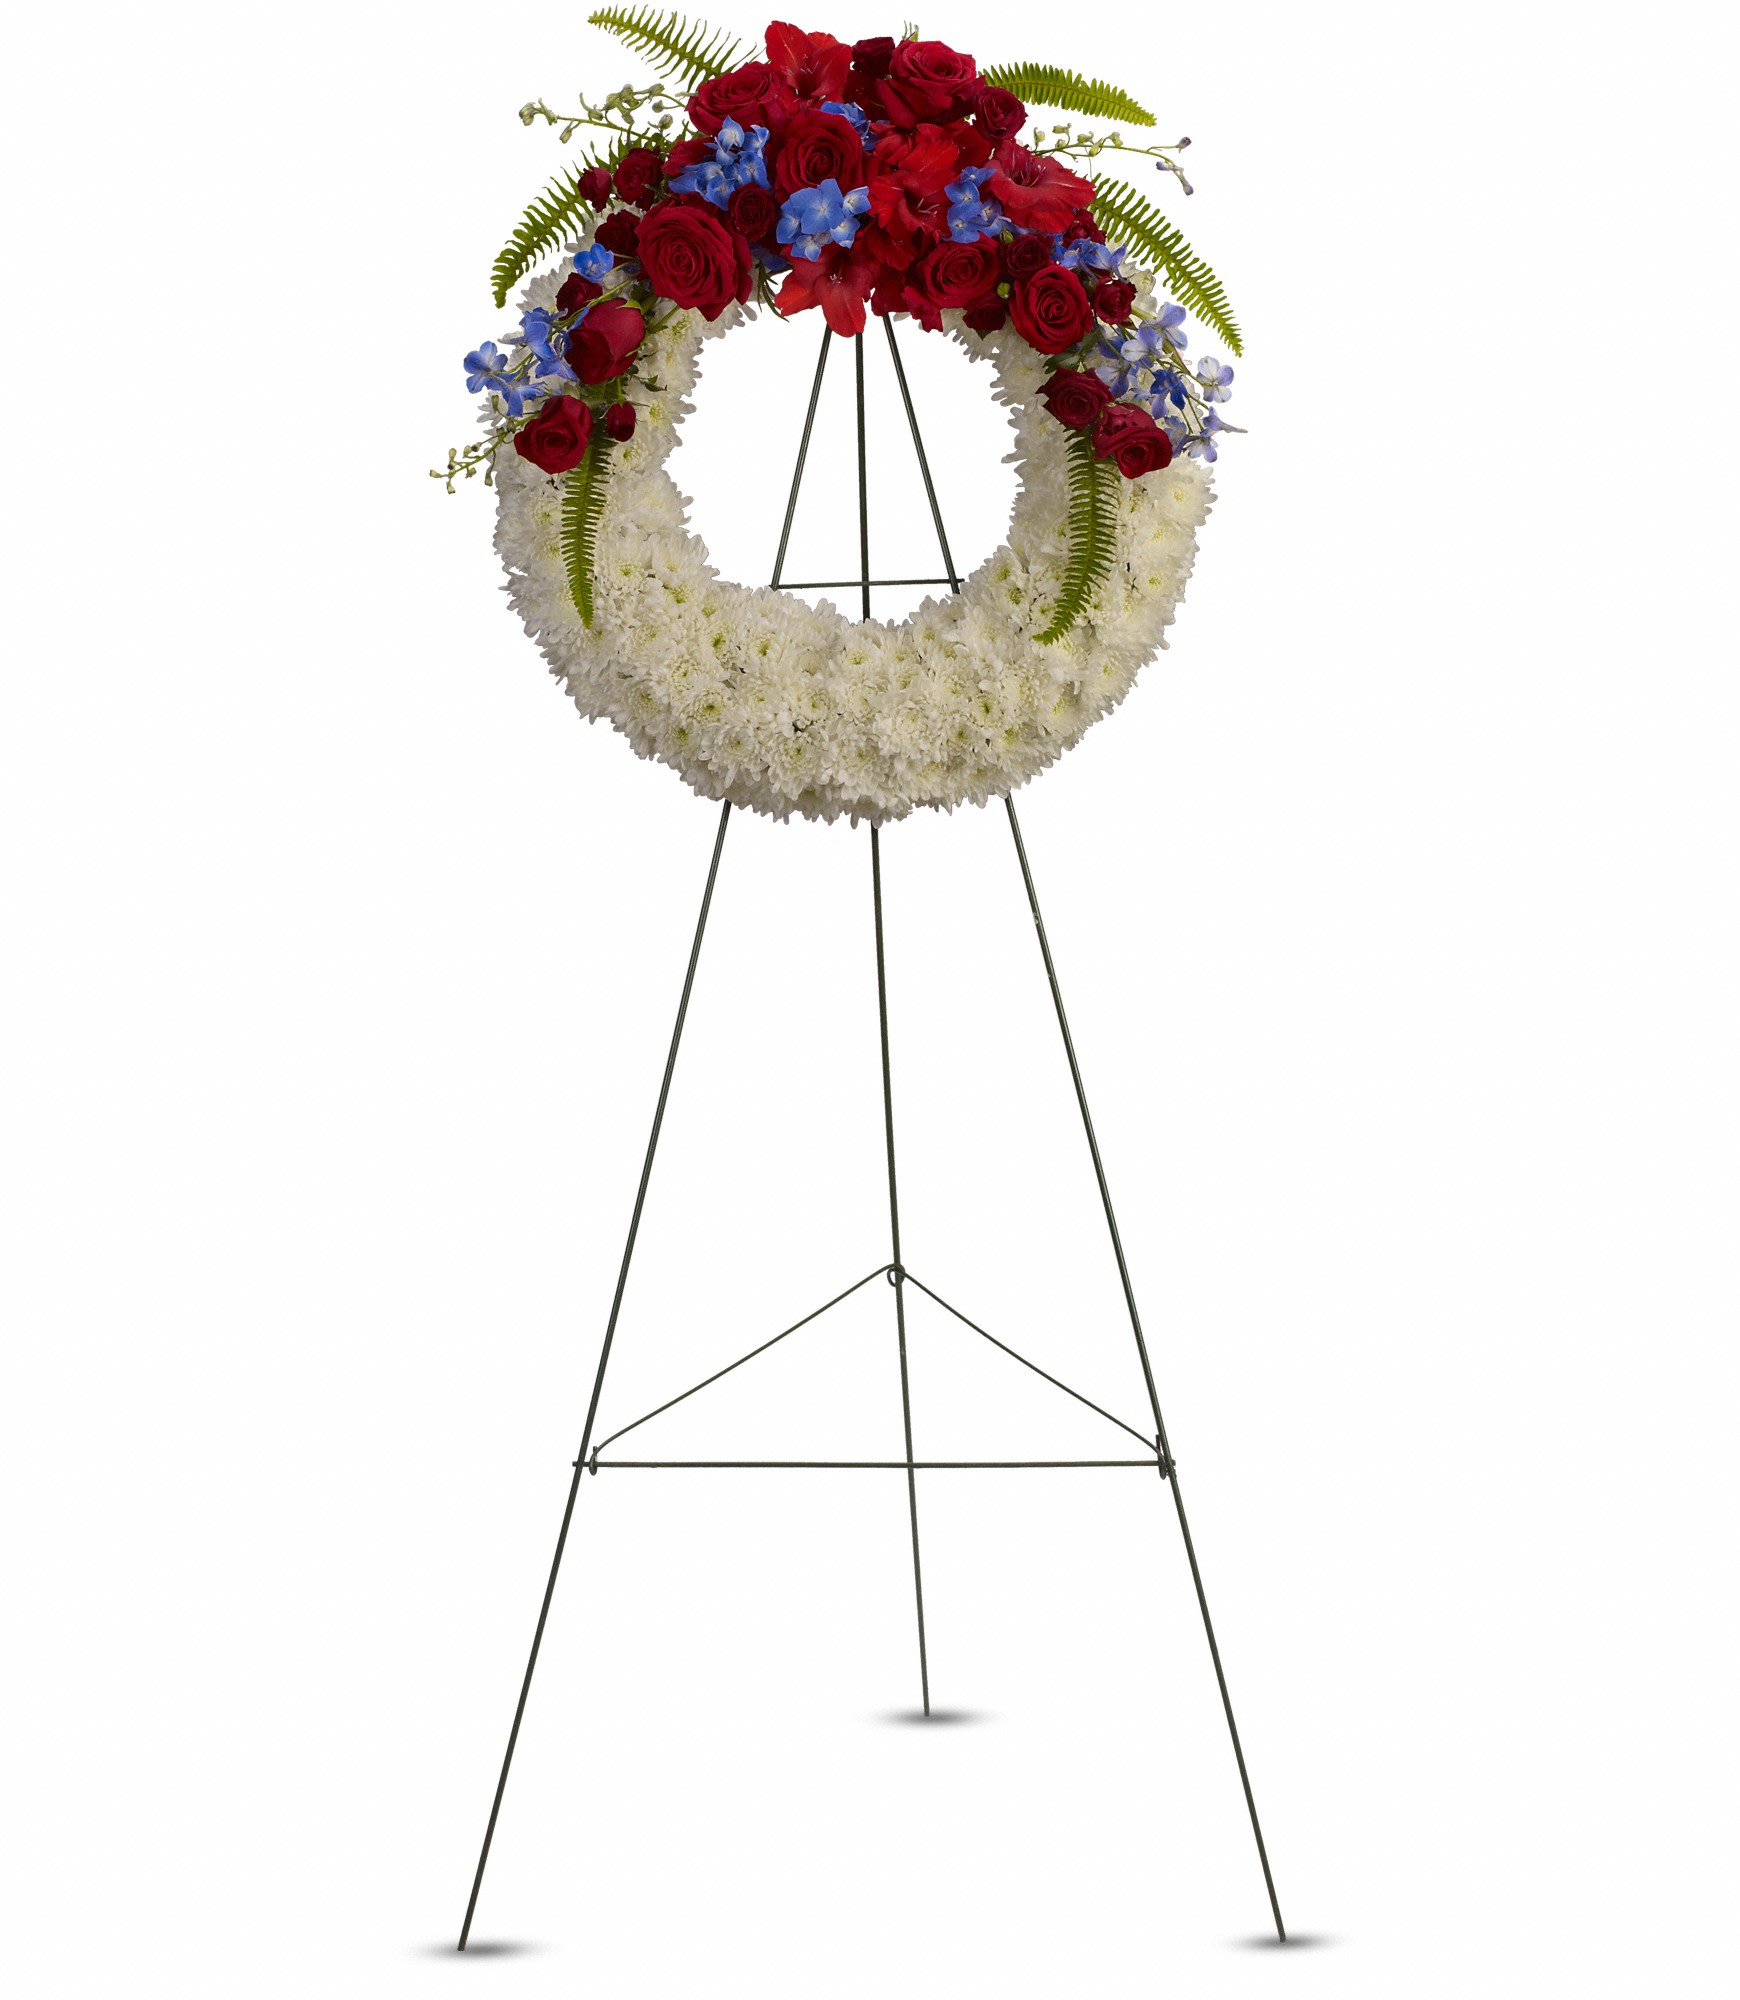 Reflections of Glory Wreath (T241-1A) - A stunning display of patriotism, strength and sympathy. This red, white and blue wreath delivers a lovely message about the dignity of the deceased. 